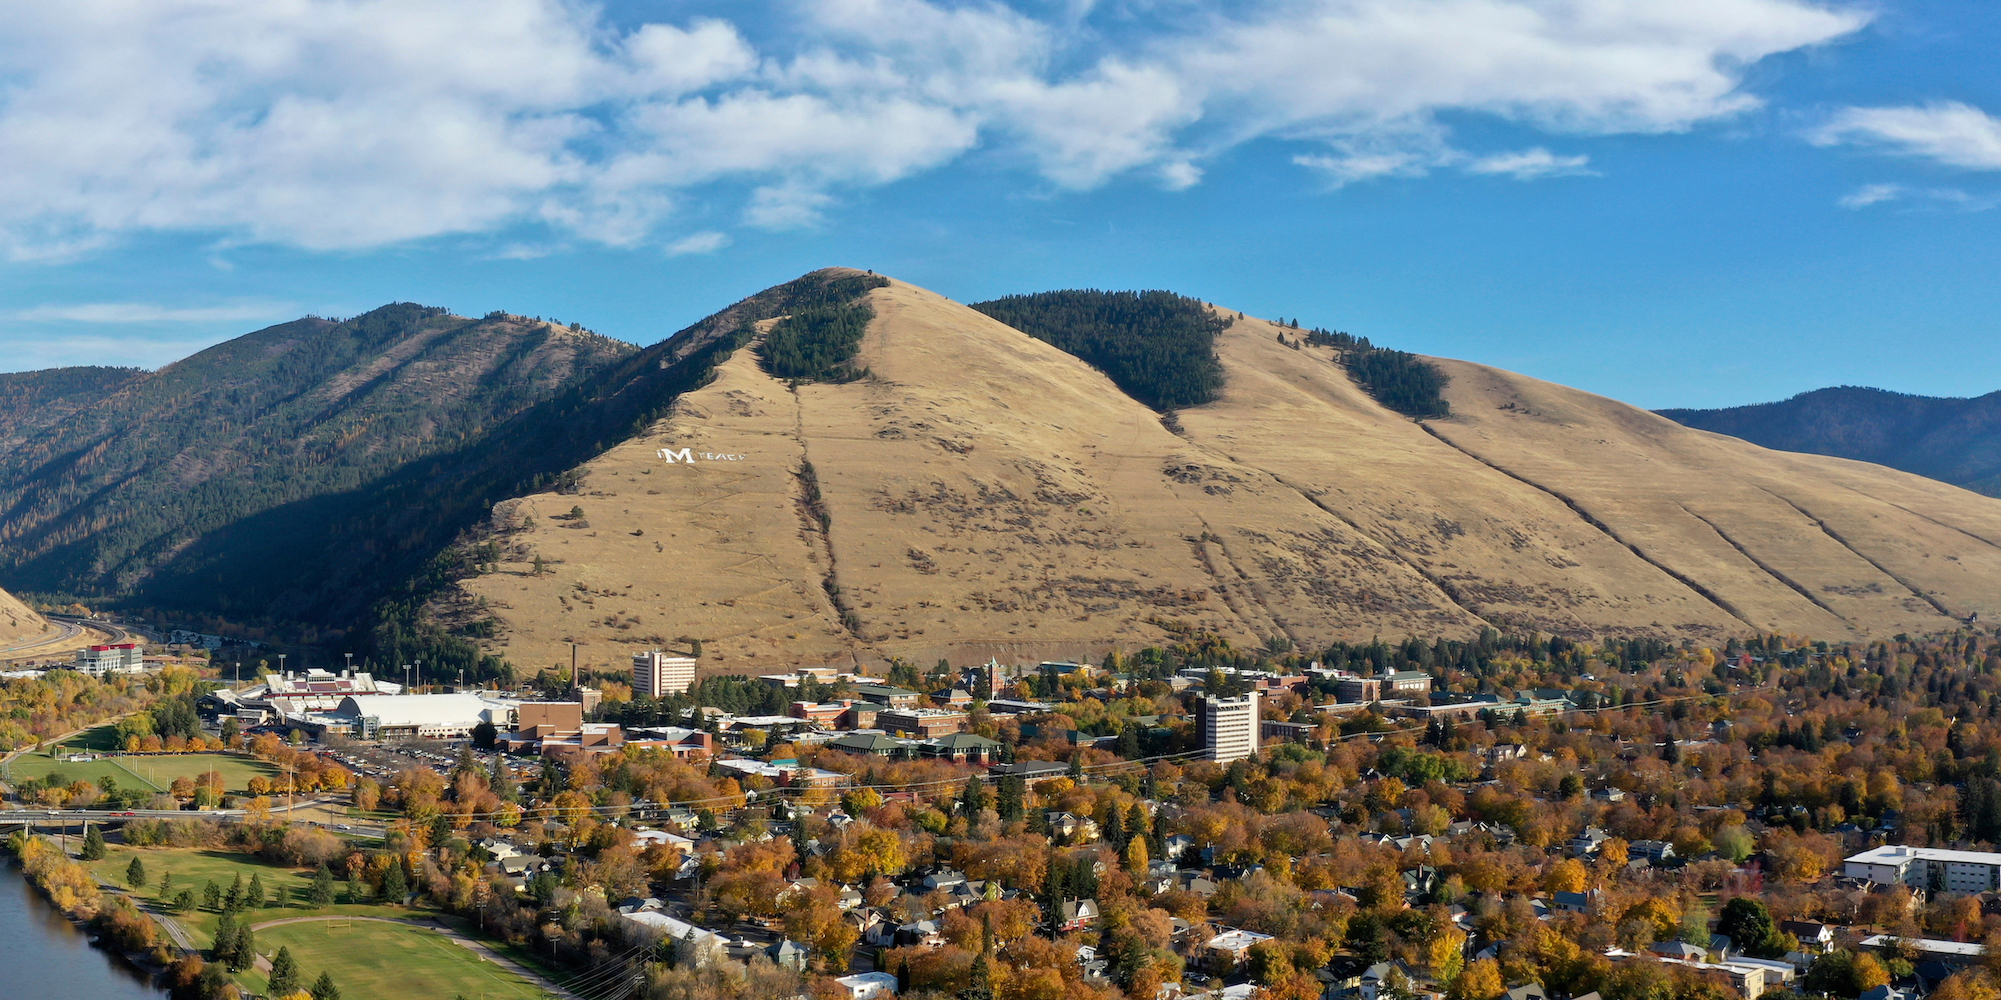 Birds eye view of the University of Montana with the classic white 'M' on the hill behind it